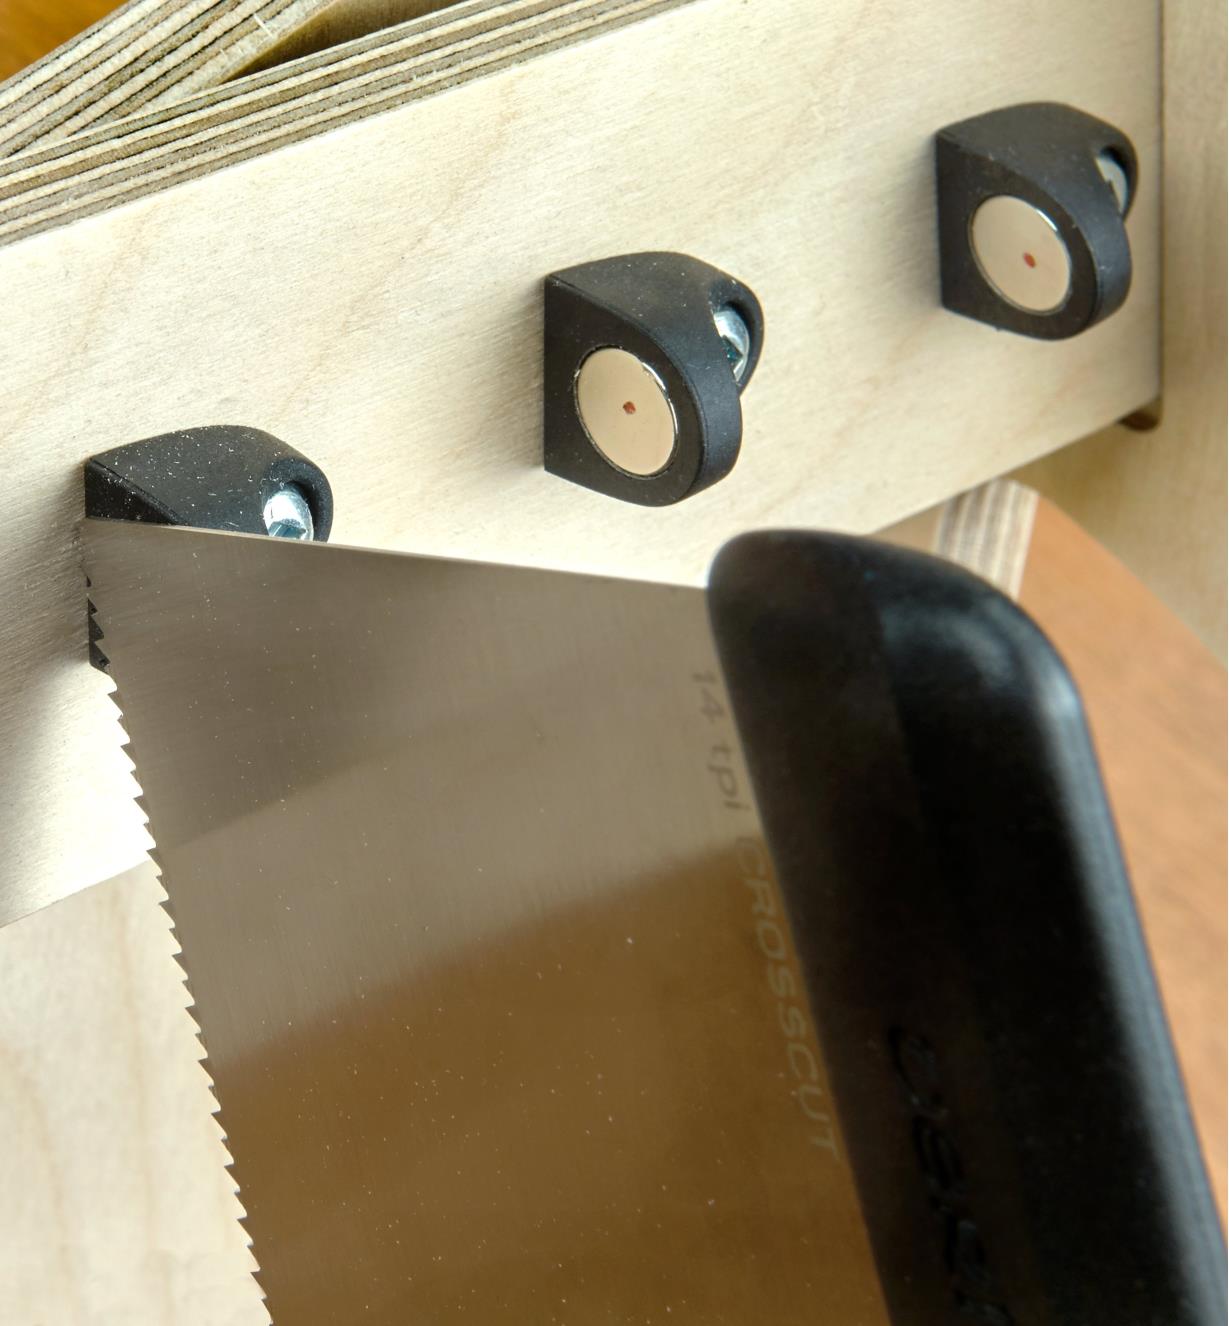 A close-up view of a saw blade held by a magnet on the upper frame of a saw till